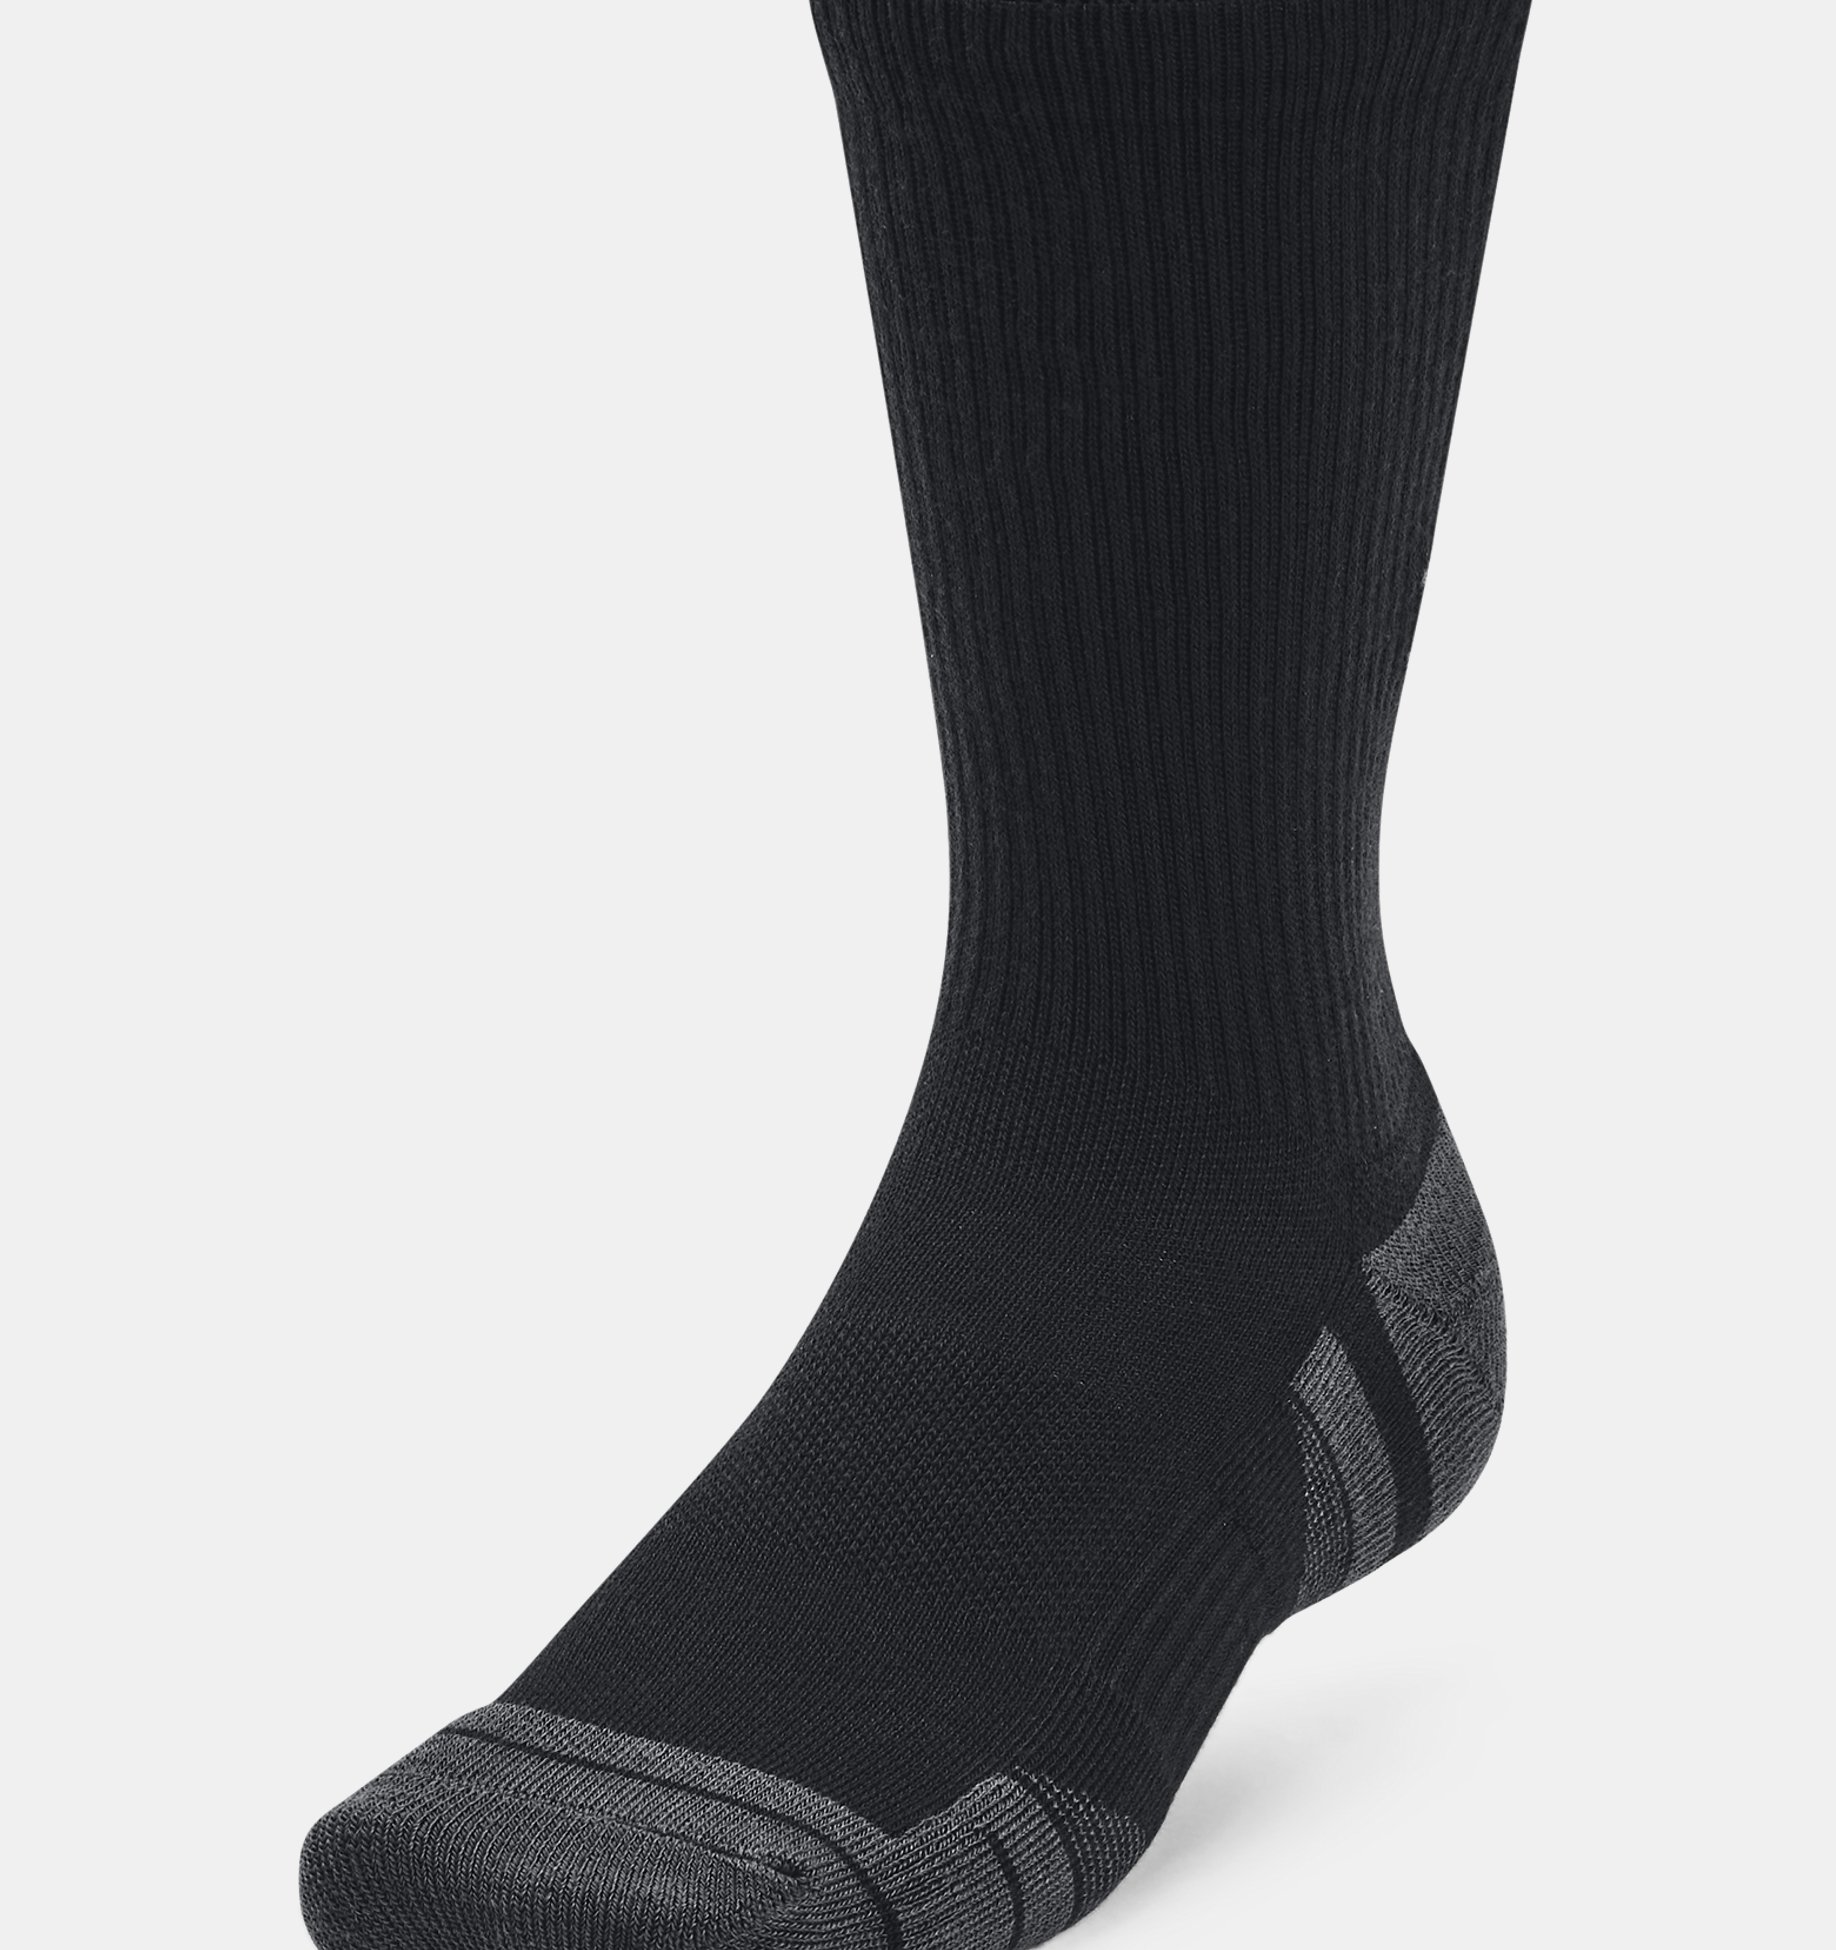 Men's Under Armour Socks: Step Up Your Active Style With UA Sports Socks